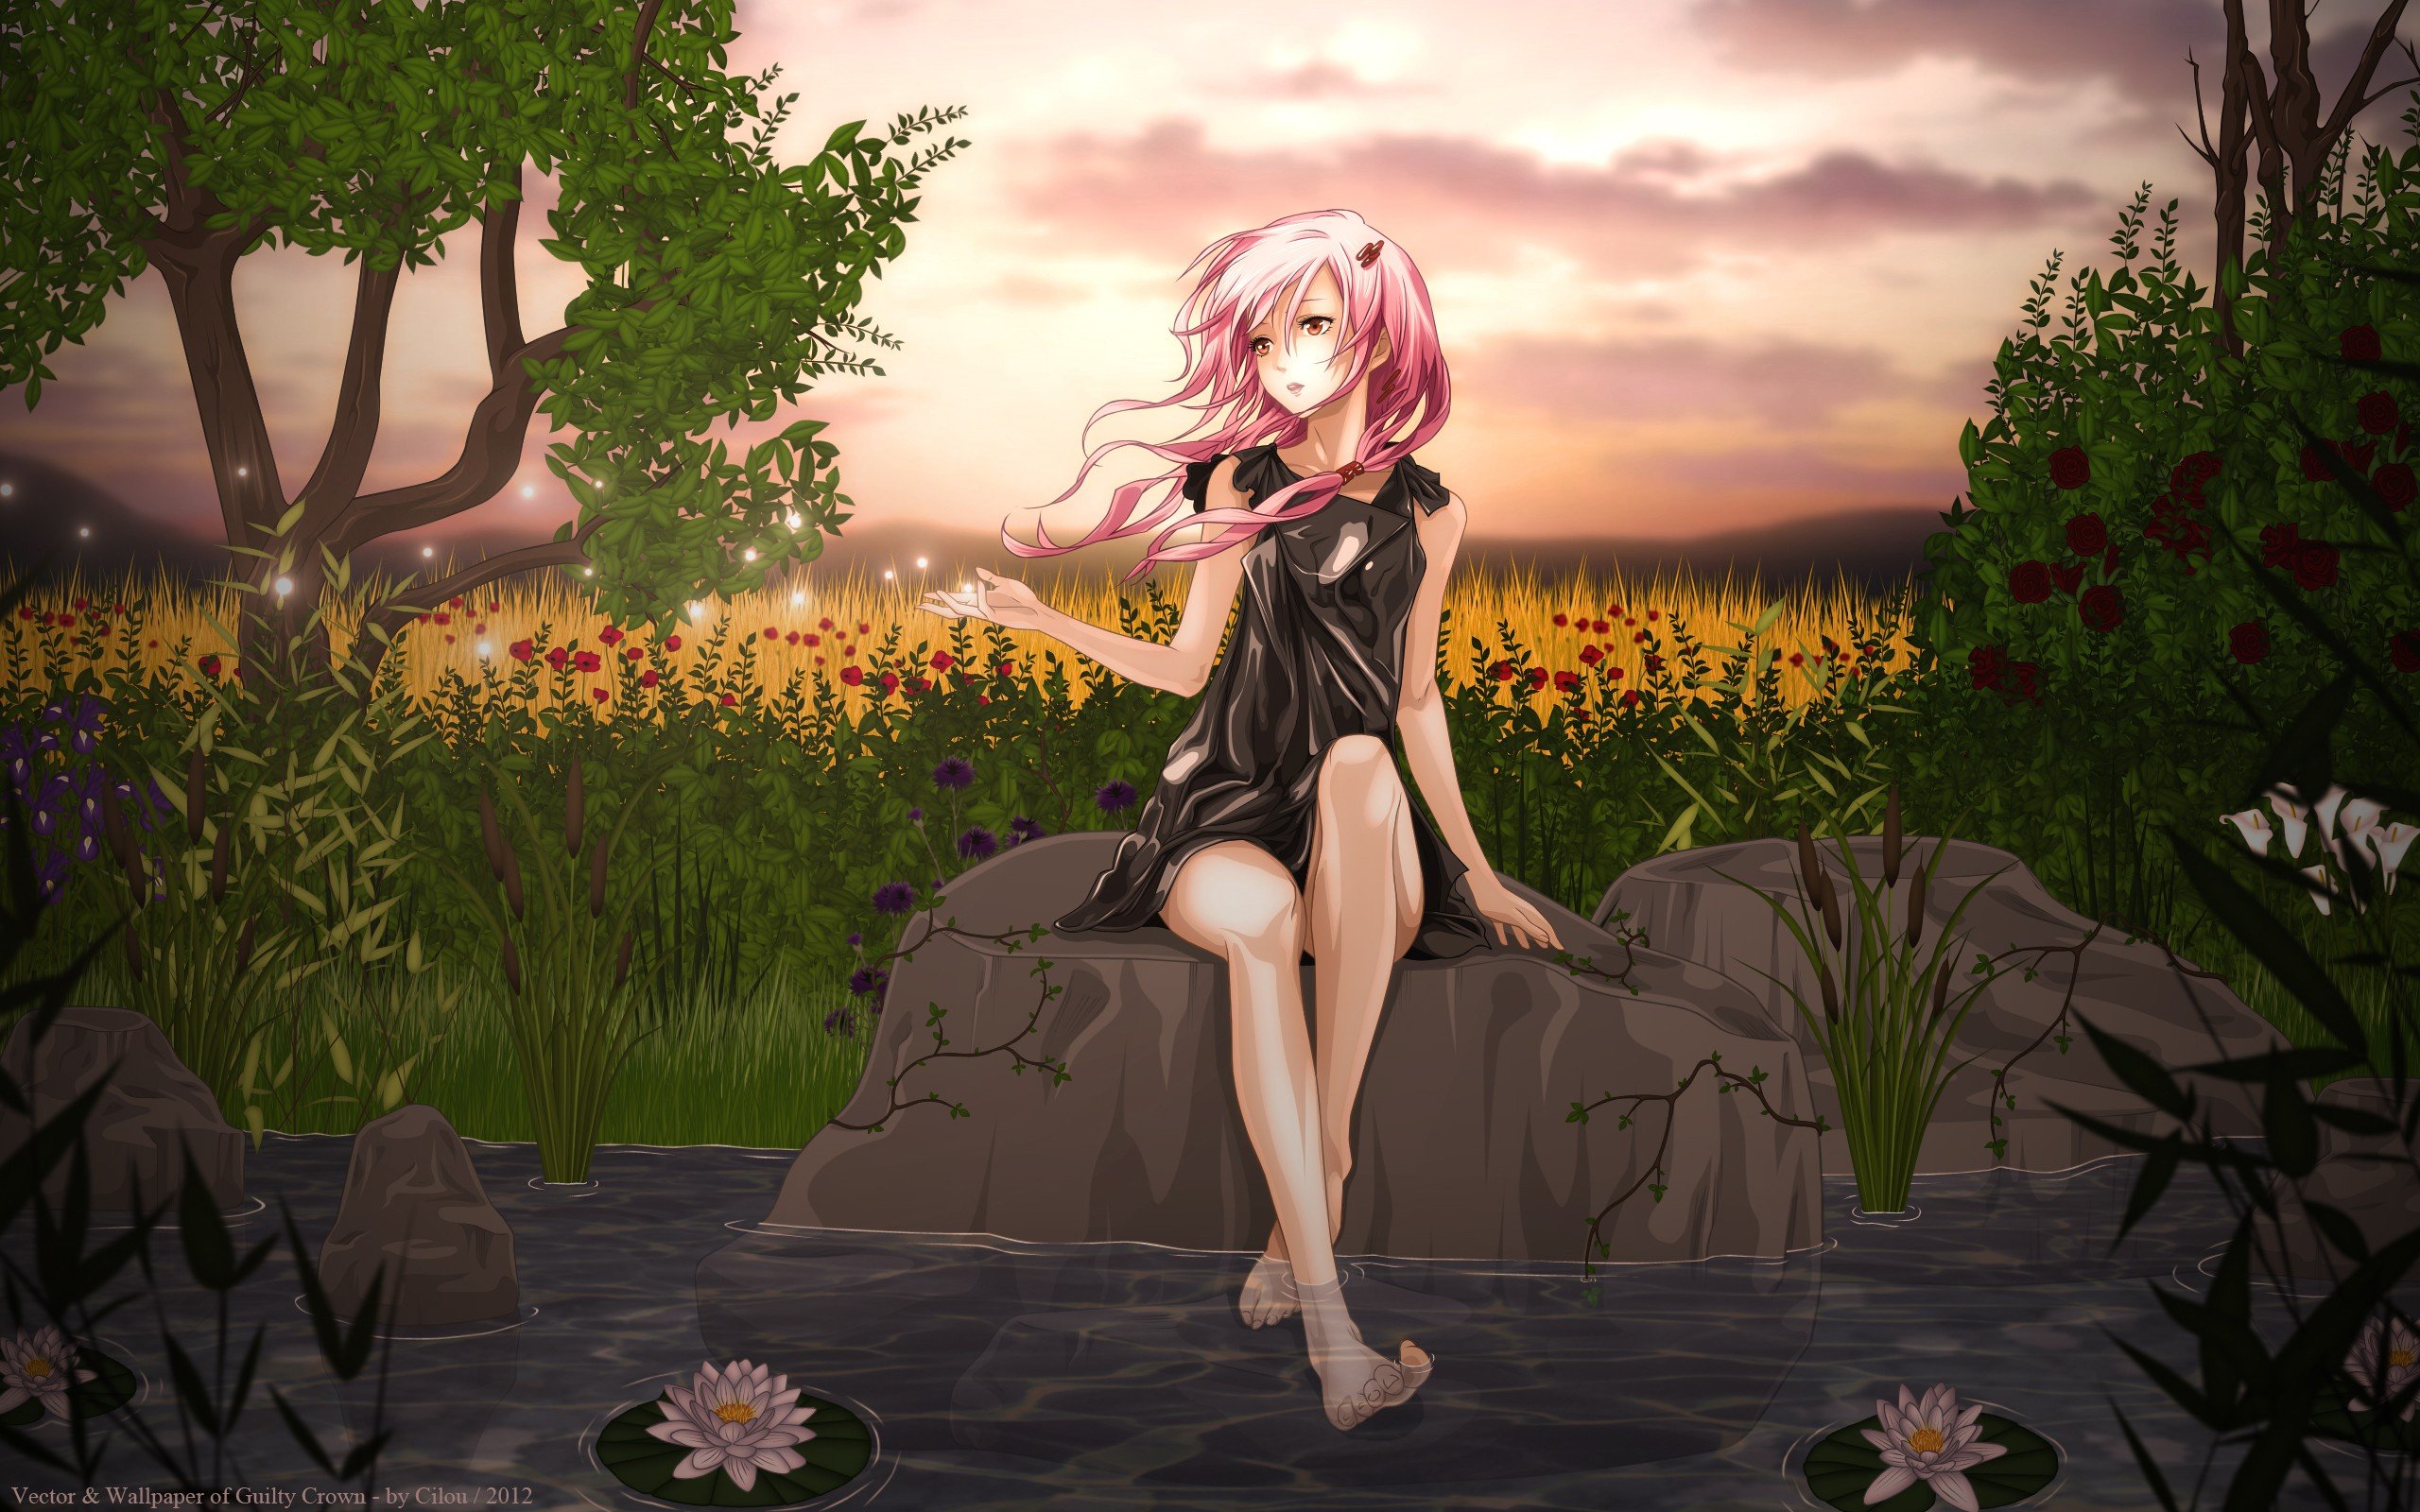 water, Clouds, Nature, Trees, Dress, Flowers, Rocks, Long, Hair, Sparkles, Ponds, Plants, Barefoot, Pink, Hair, Red, Eyes, Twintails, Black, Dress, Lily, Pads, Skyscapes, Bushes, Guilty, Crown, Hair, Ornaments, Wallpaper